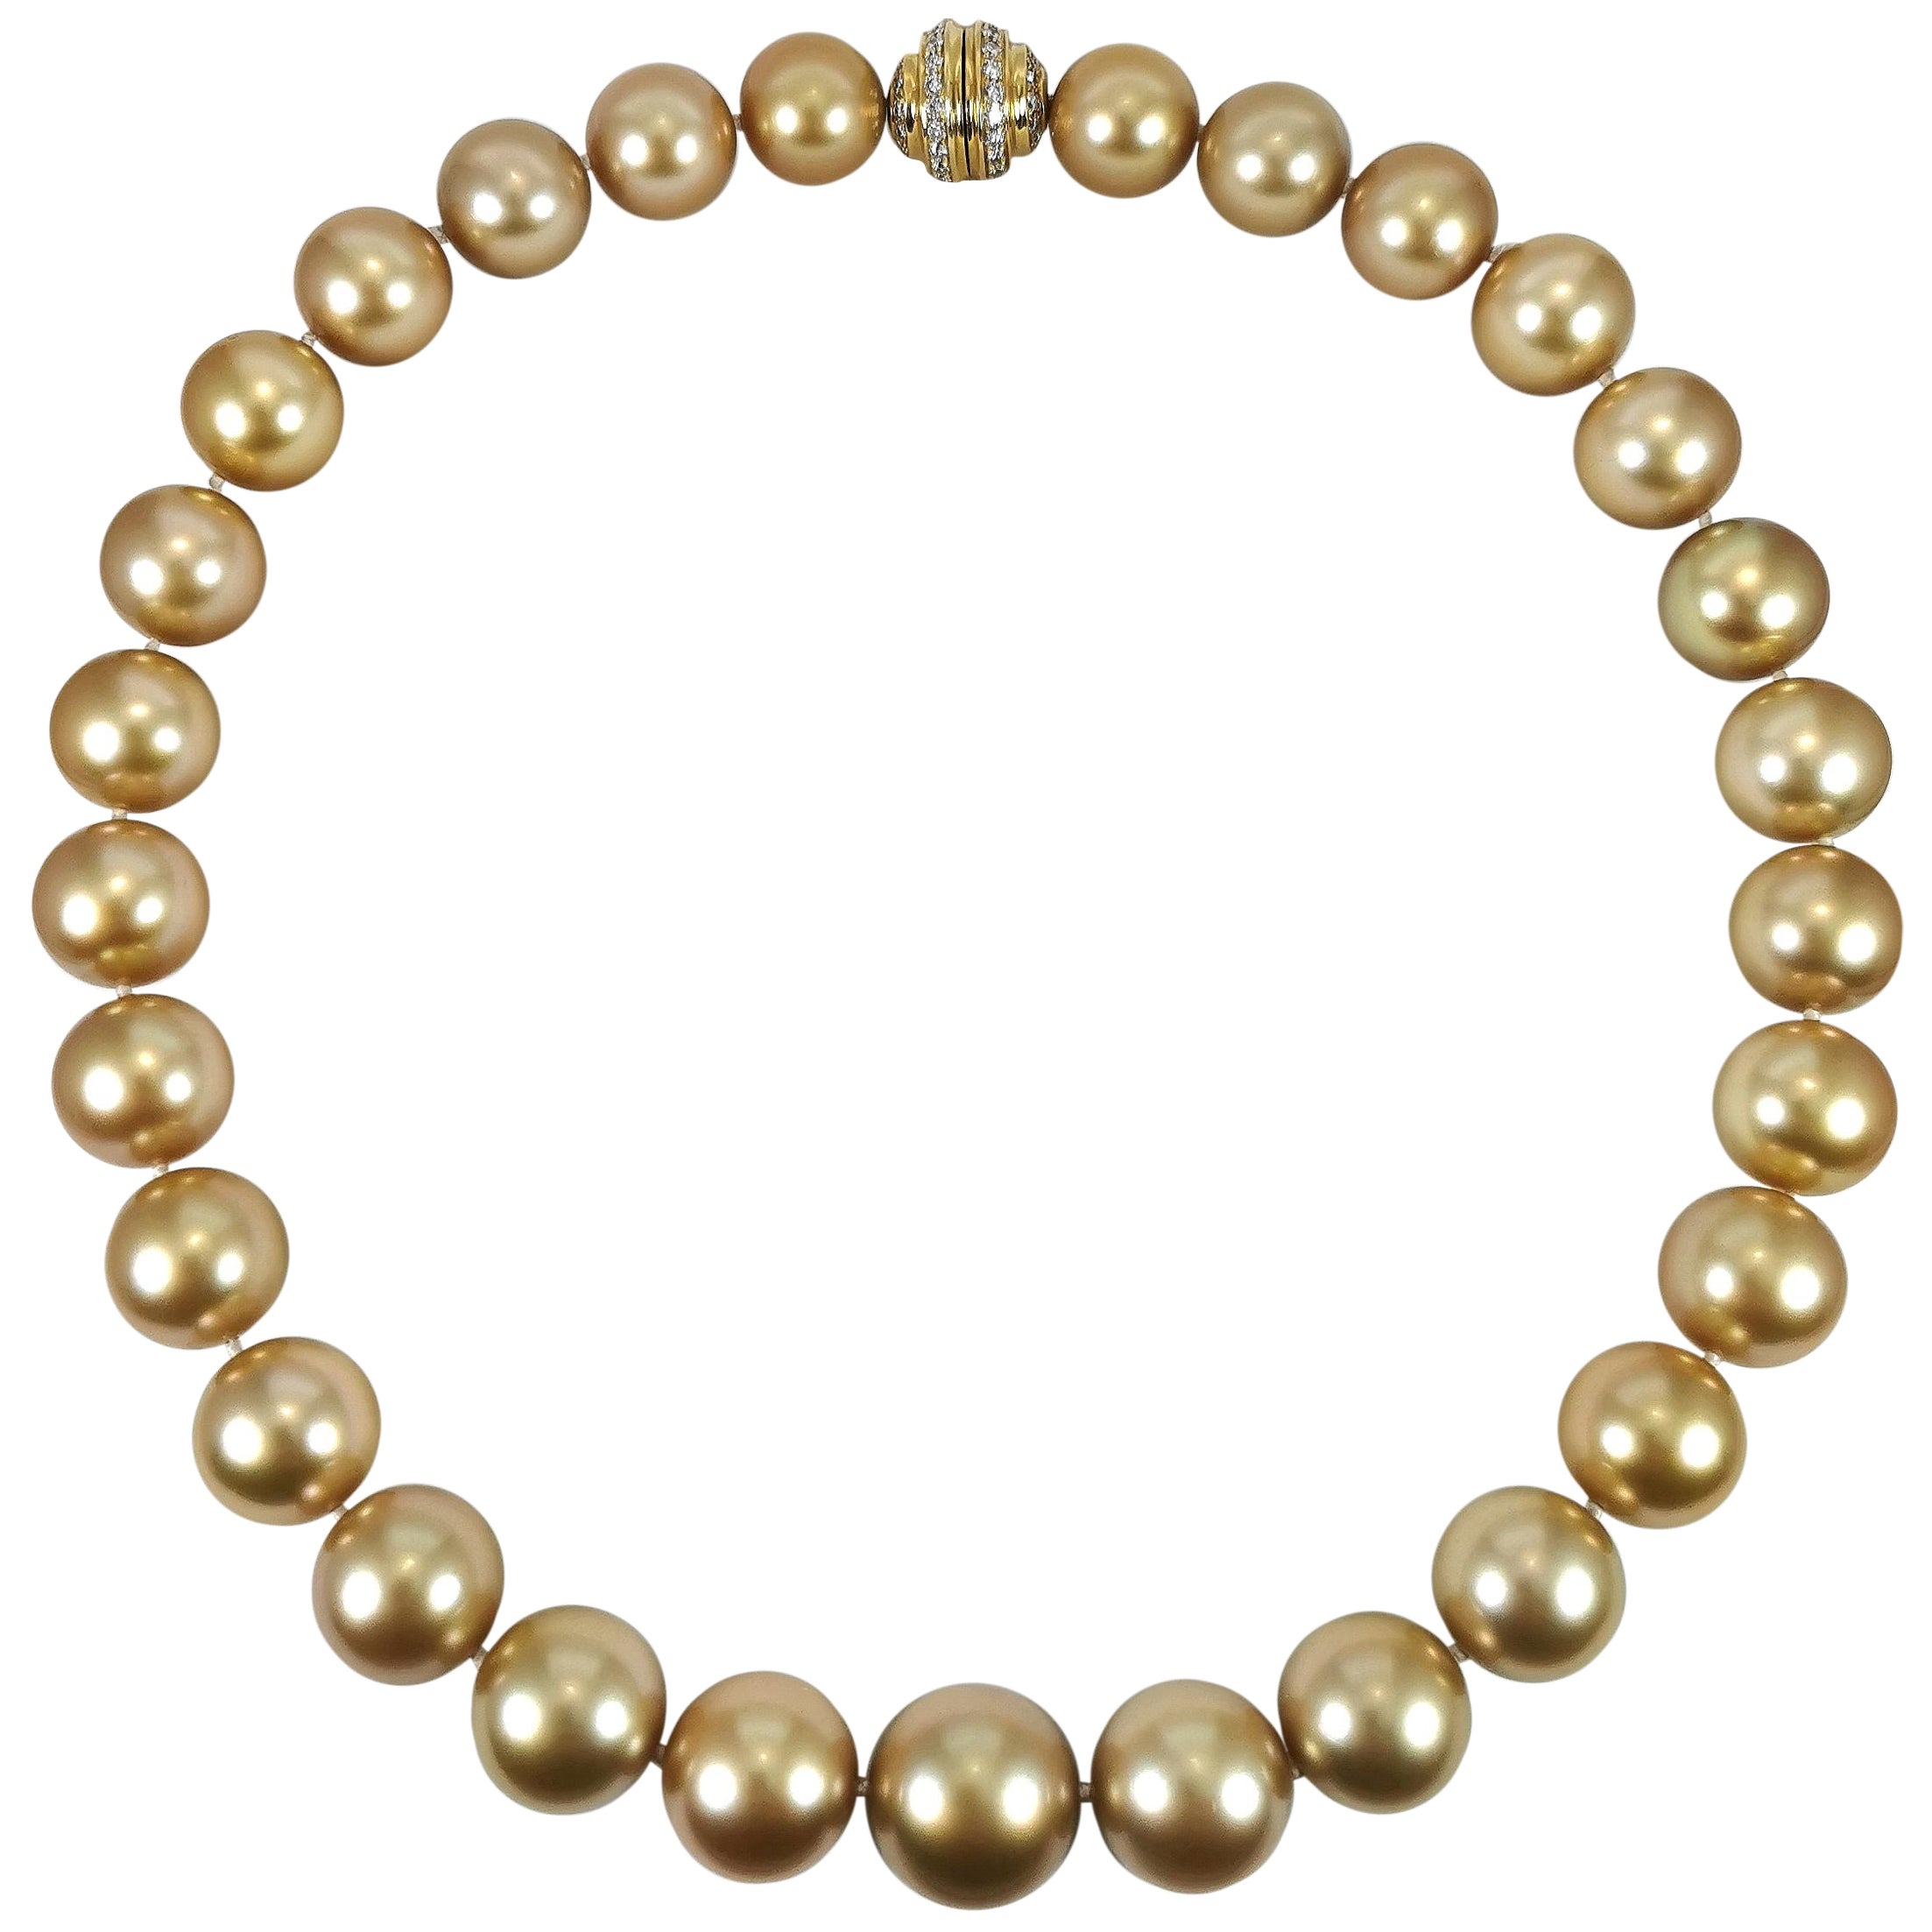 Top Gem Golden Southsea Necklace with 18k Gold Diamonds Clasp For Sale